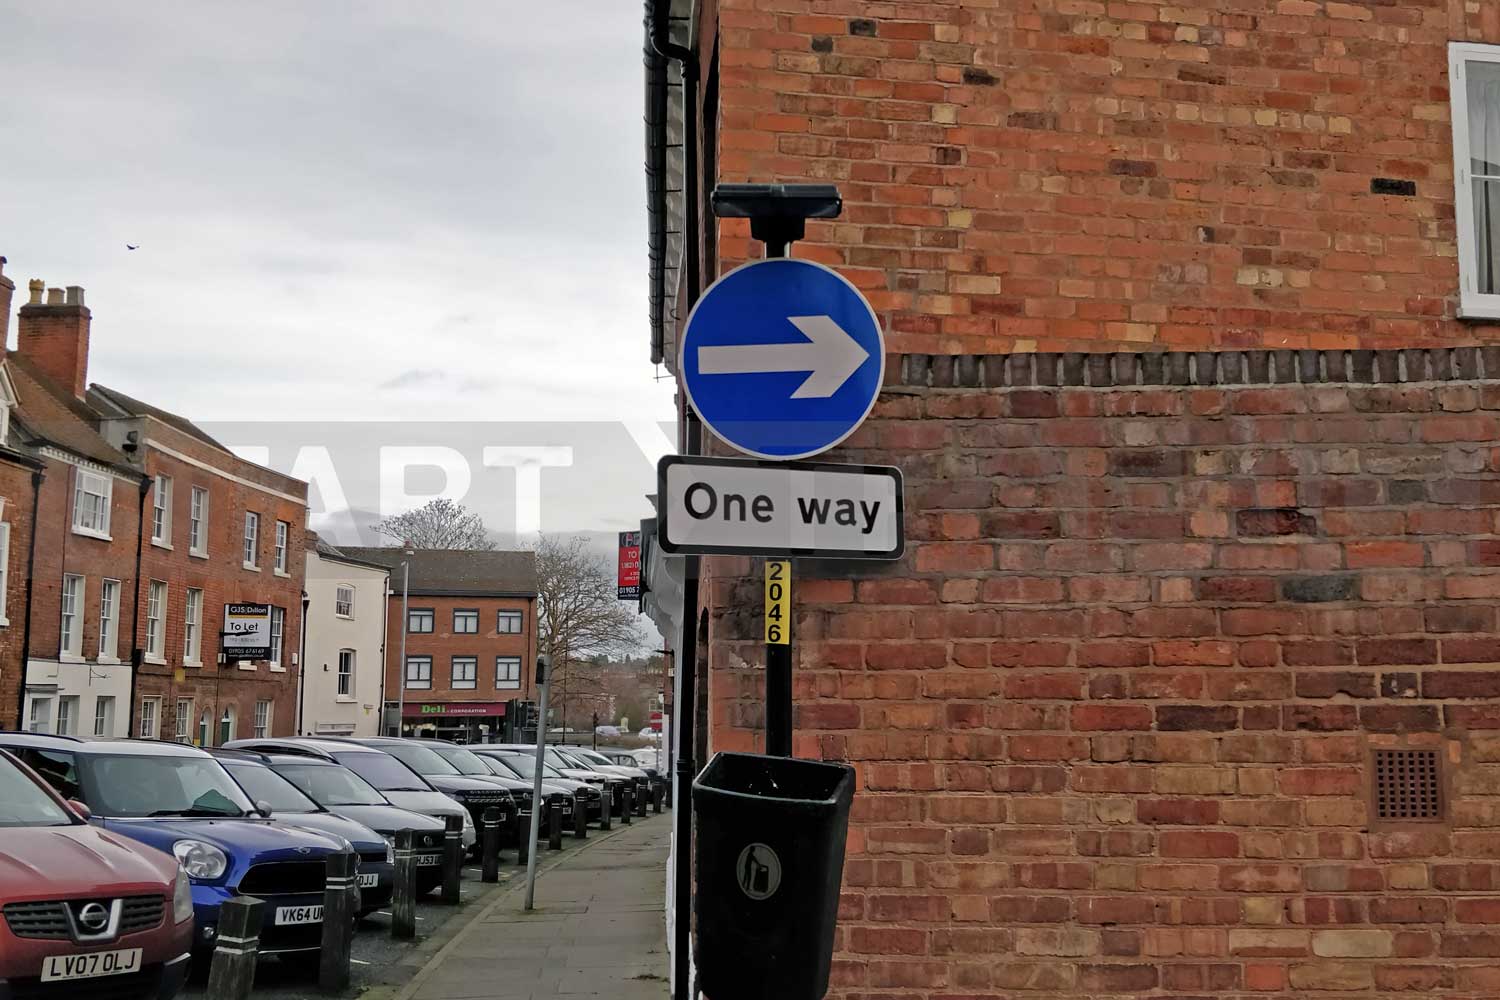 One way signage in Worcester city centre